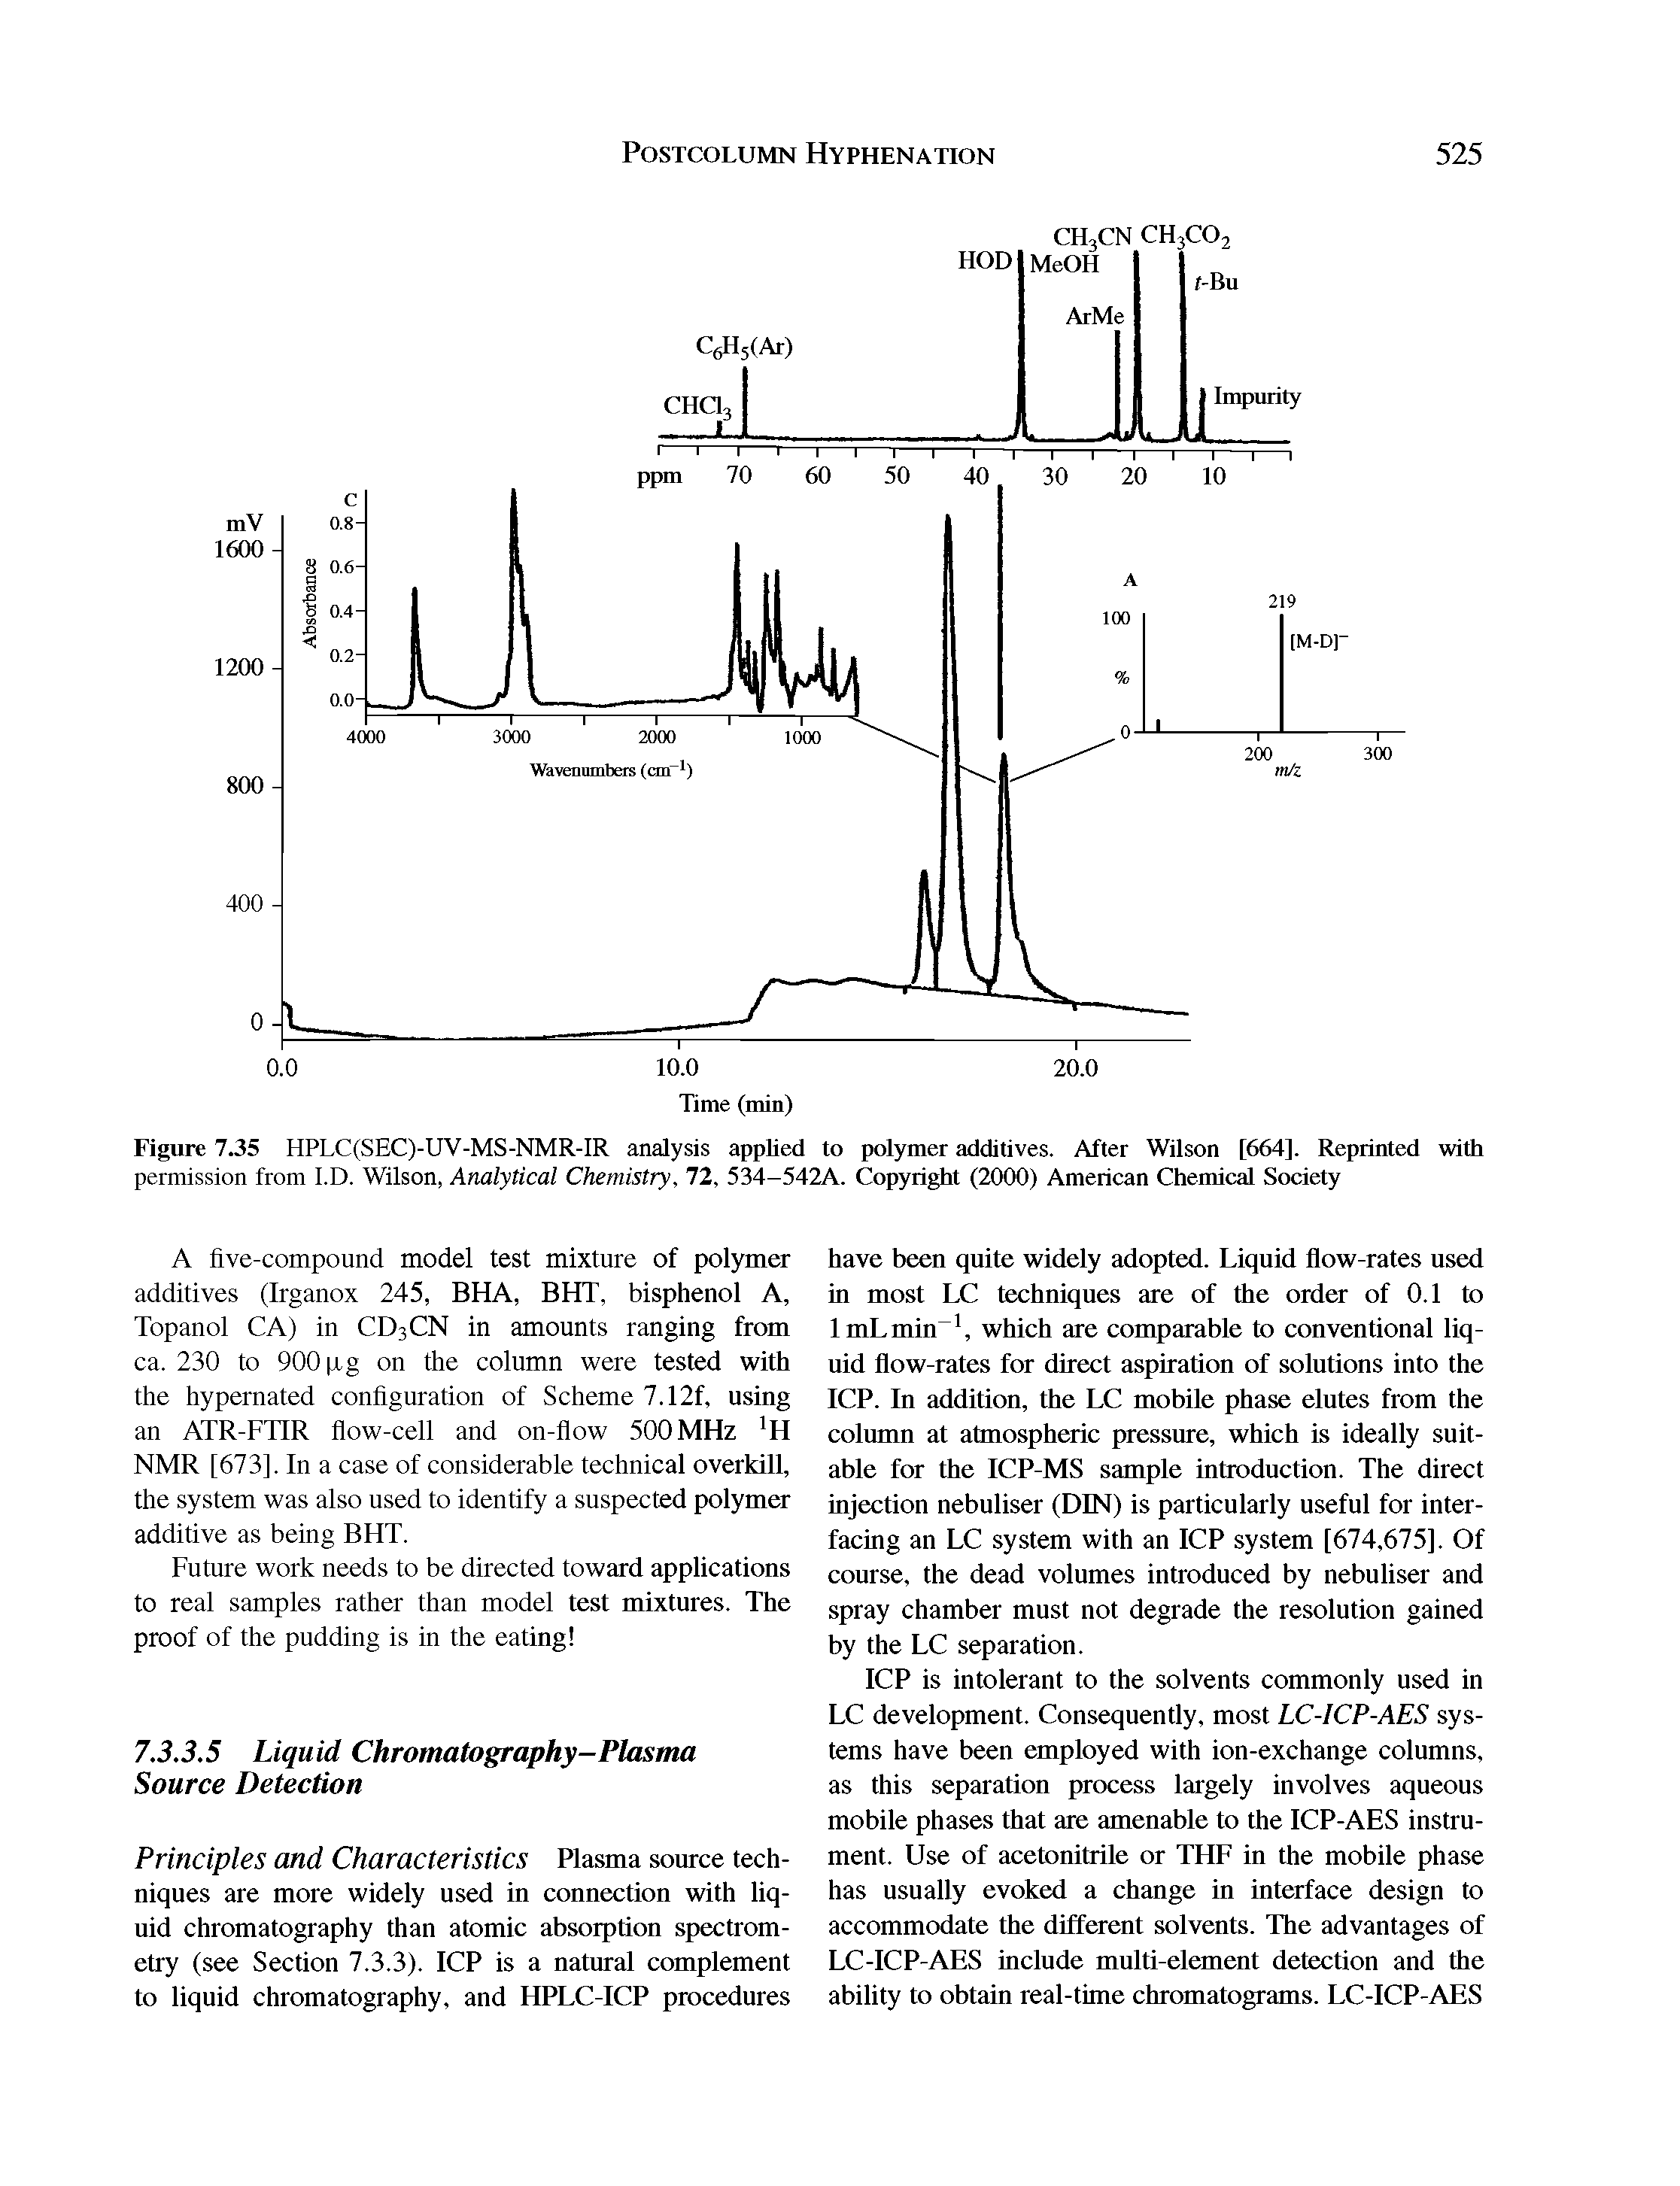 Figure 7.35 HPLC(SEC)-UV-MS-NMR-IR analysis applied to polymer additives. After Wilson [664]. Reprinted with permission from I.D. Wilson, Analytical Chemistry, 72, 534-542A. Copyright (2000) American Chemical Society...